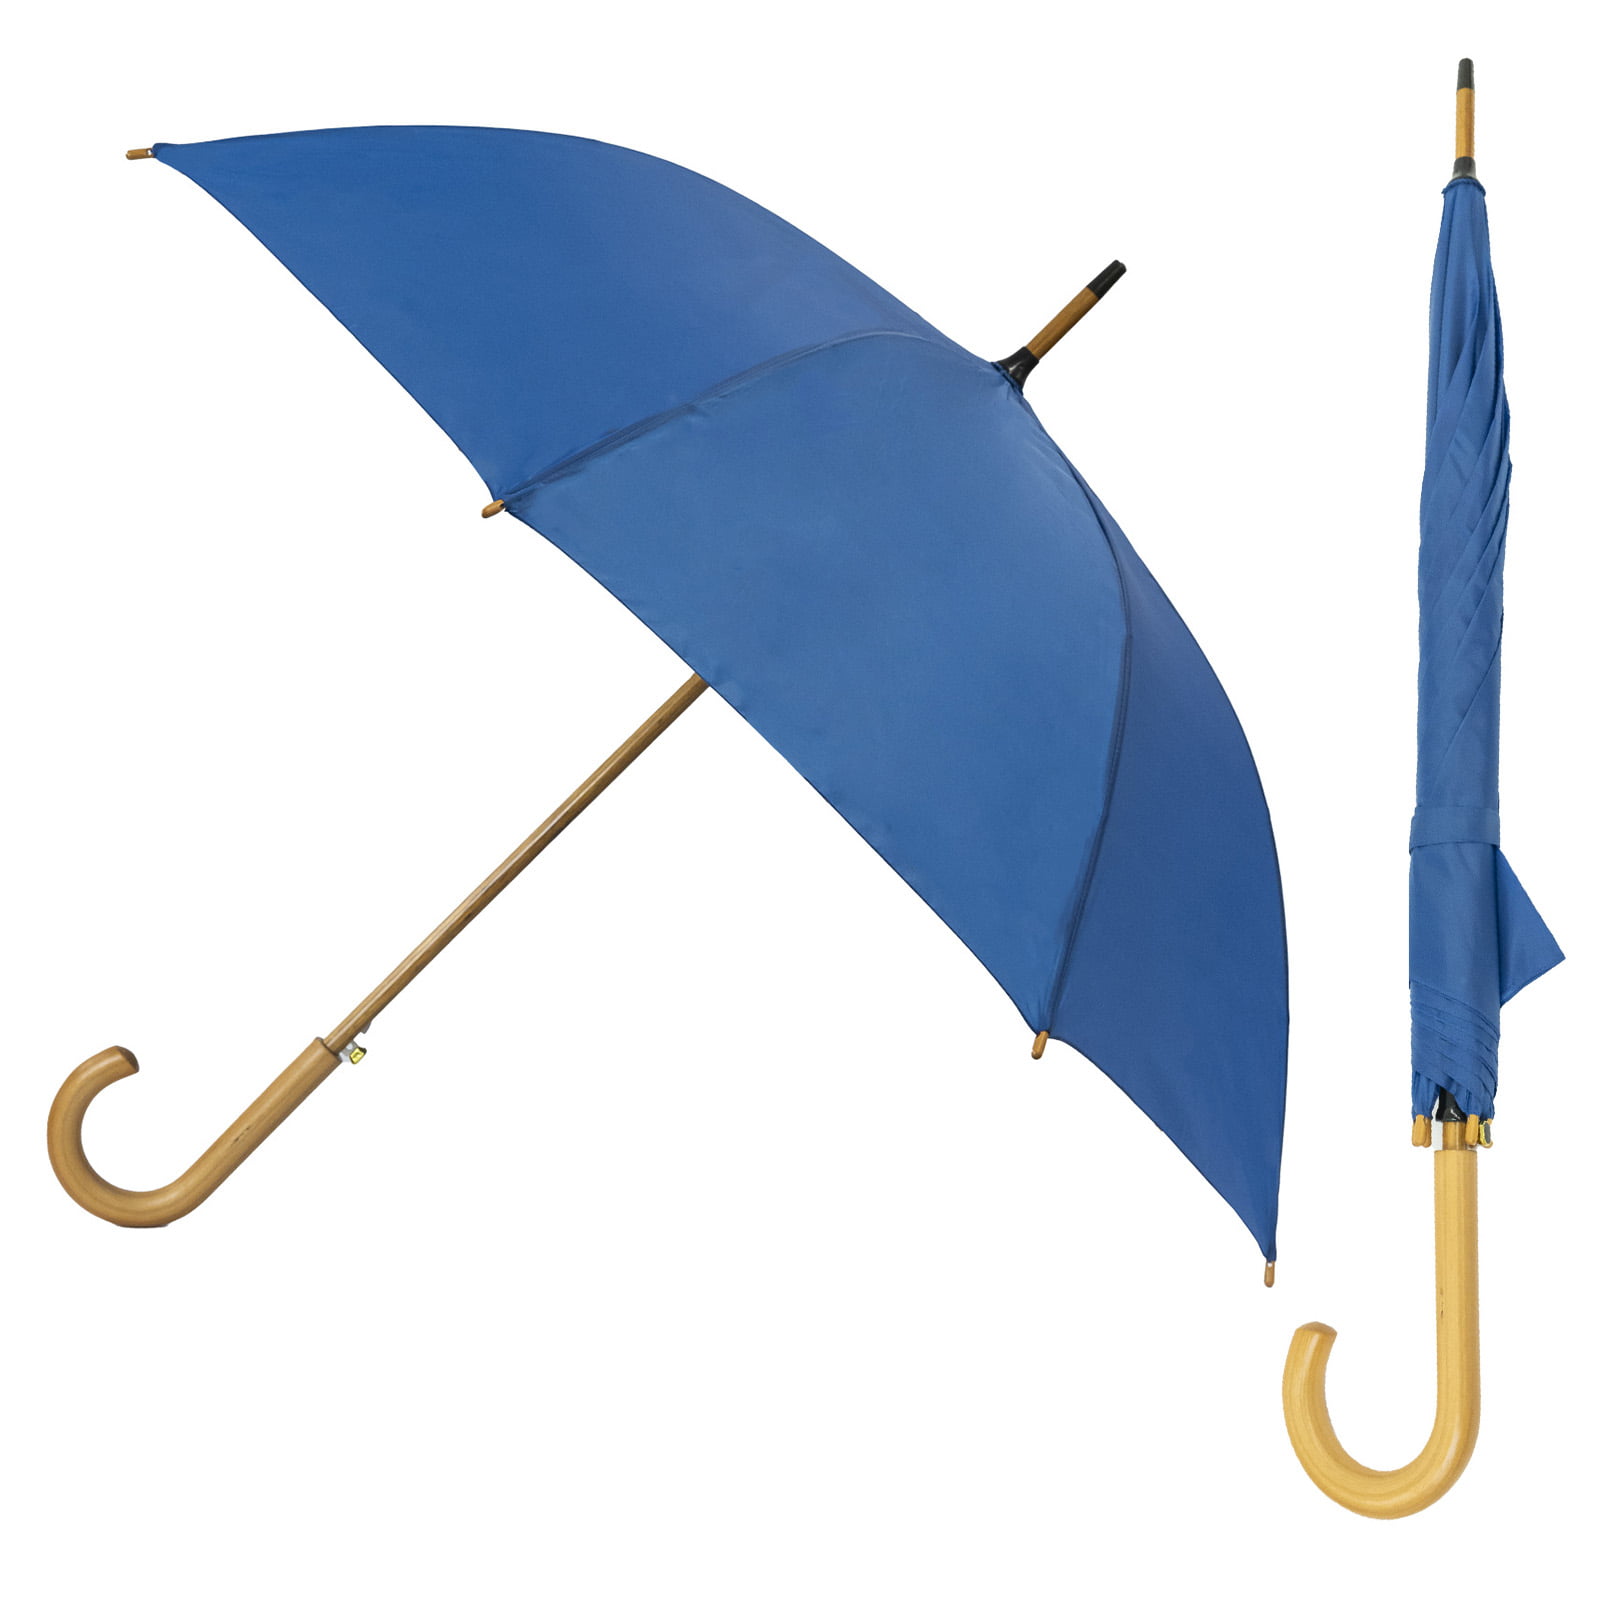 Blue Wood Stick Umbrella composite image showing both open and closed